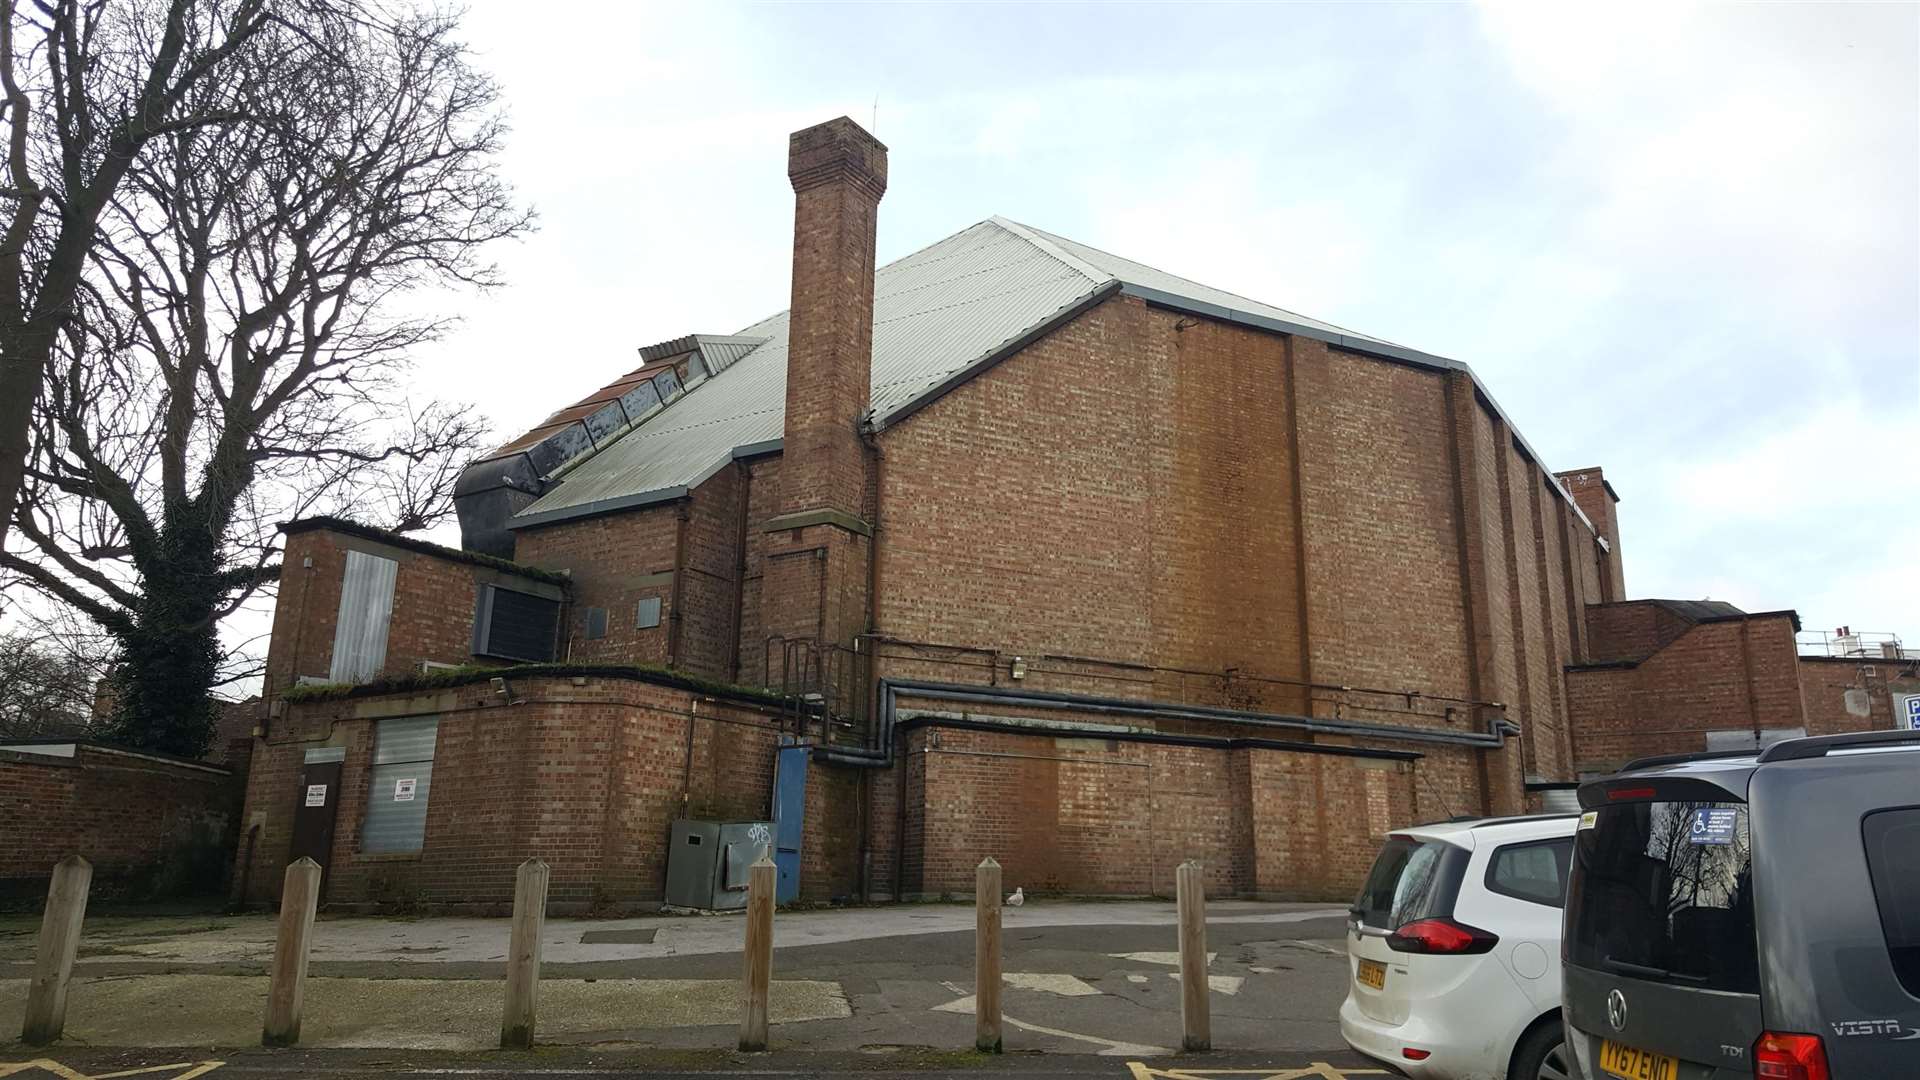 The council hopes to demolish the back of the former bingo hall.